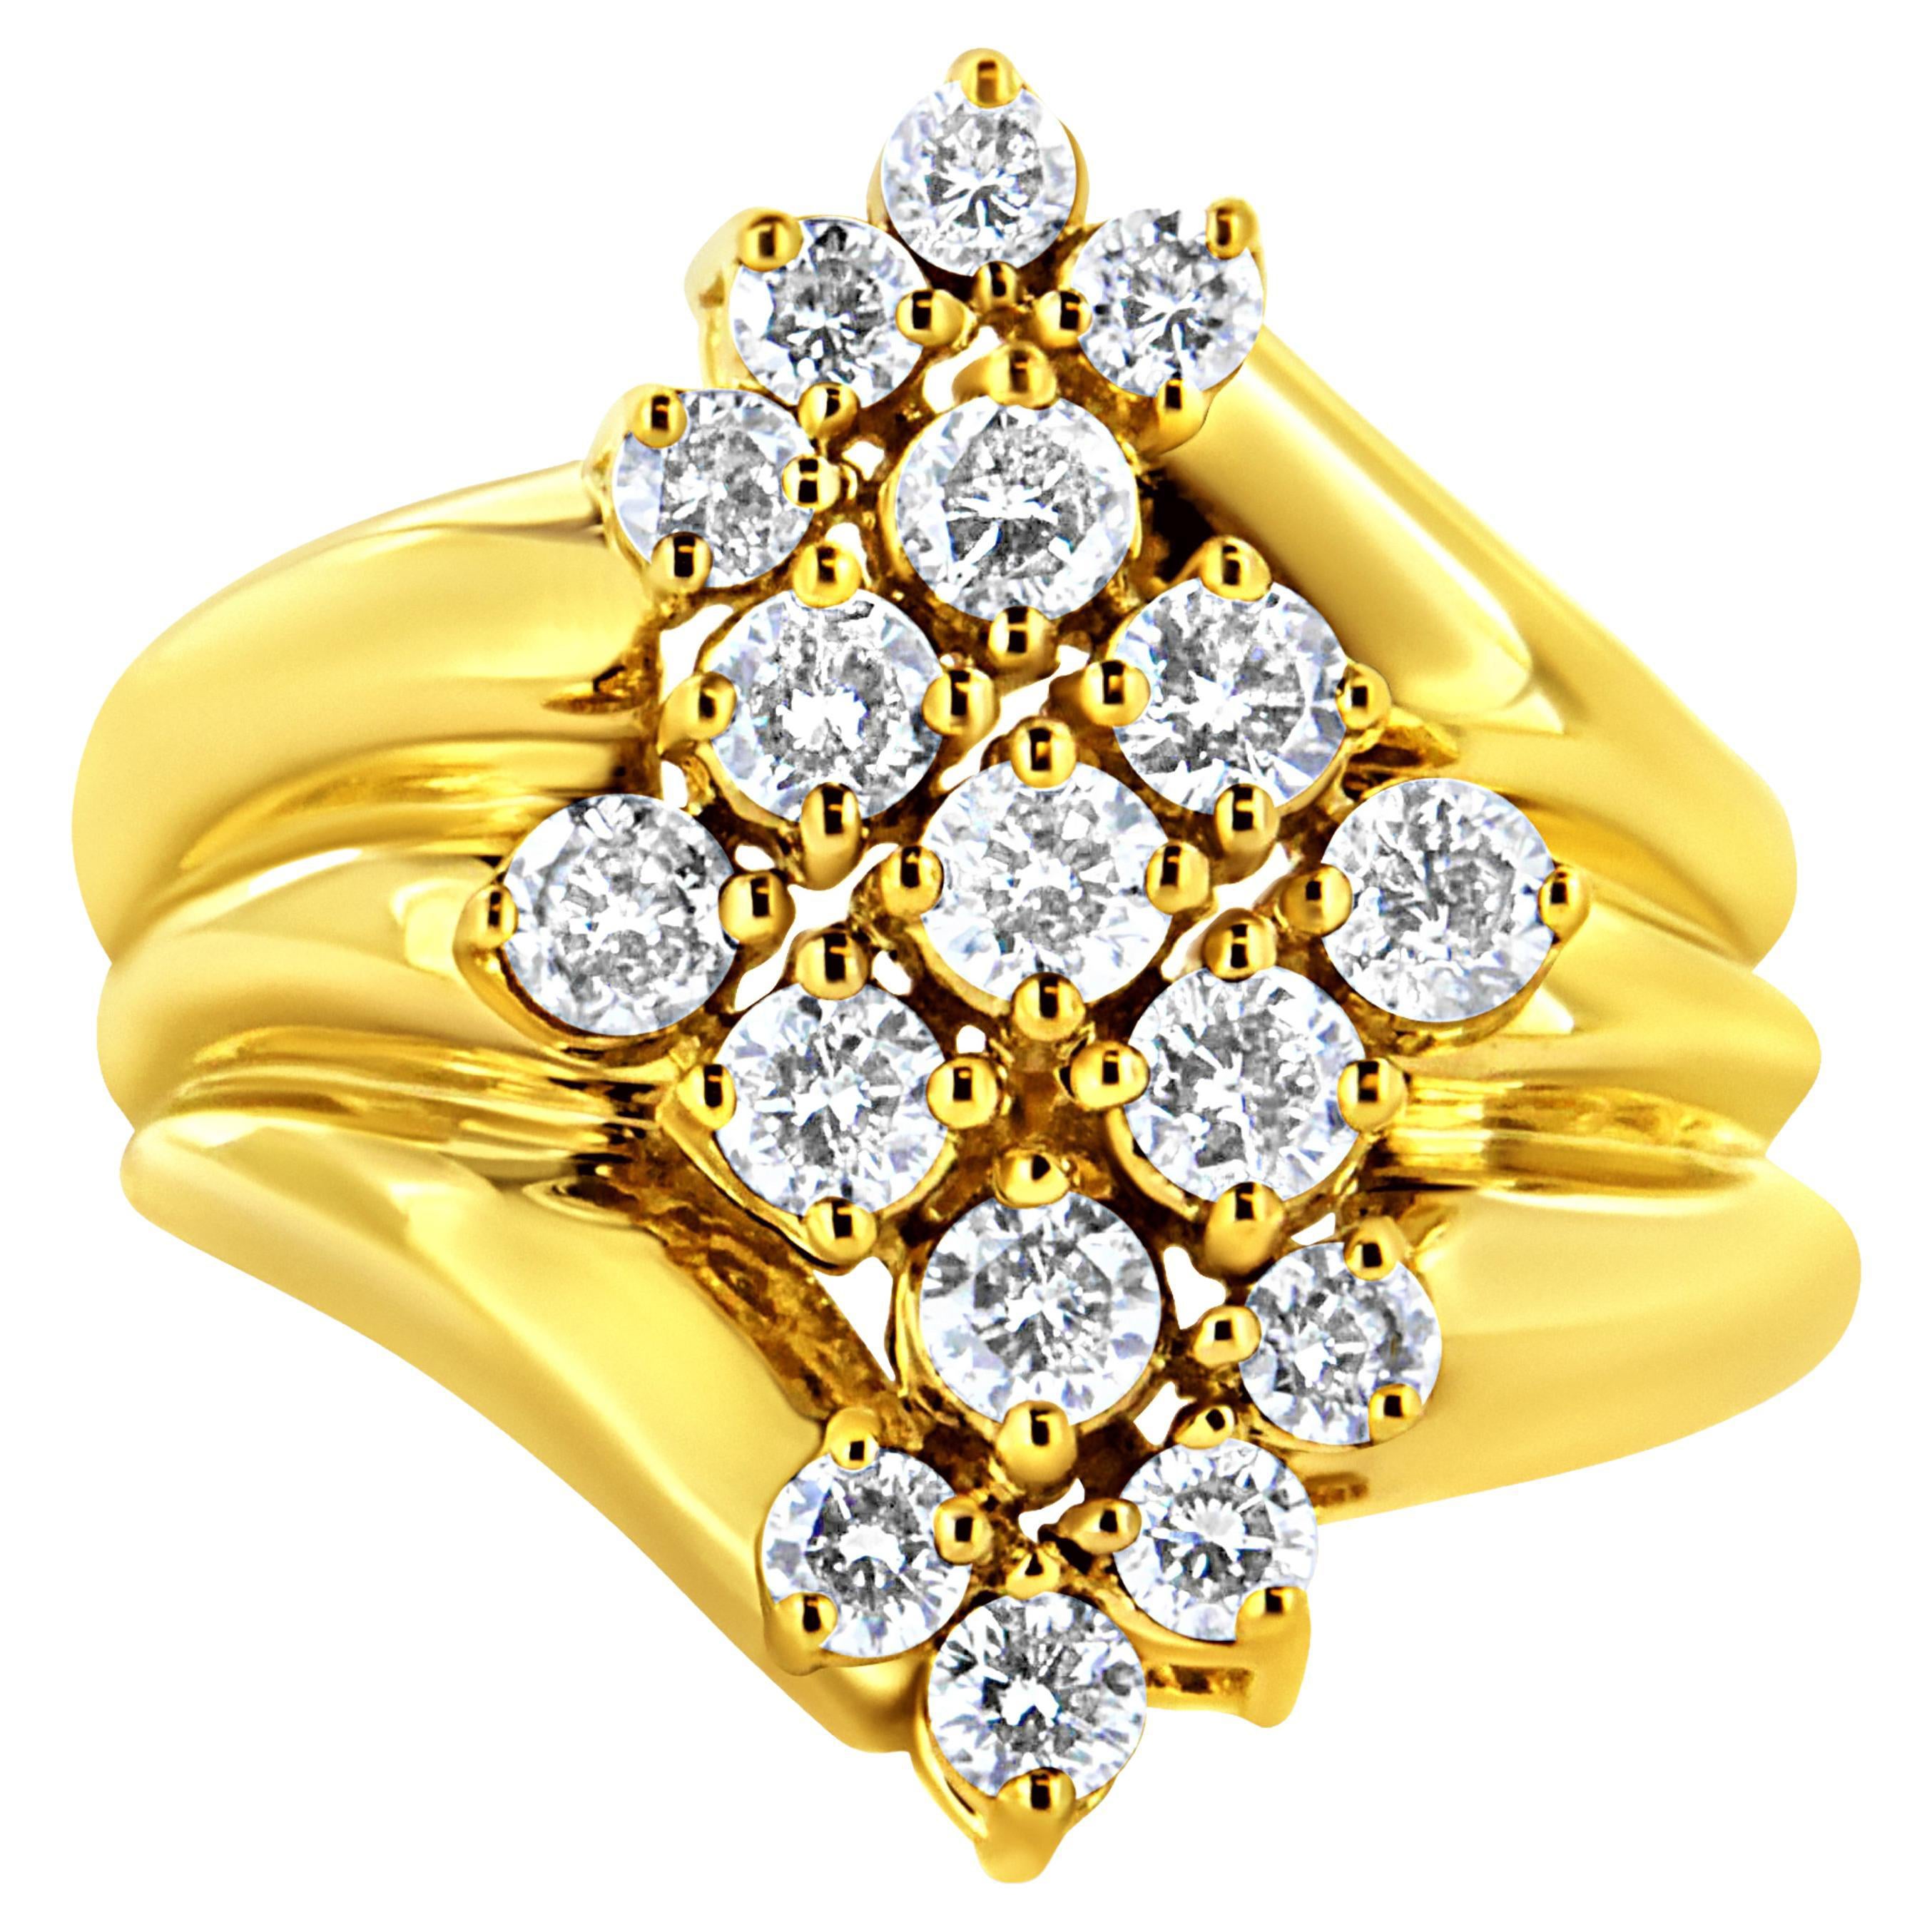 10K Yellow Gold Plated .925 Sterling Silver 1 1/2 Carat Diamond Cocktail Ring